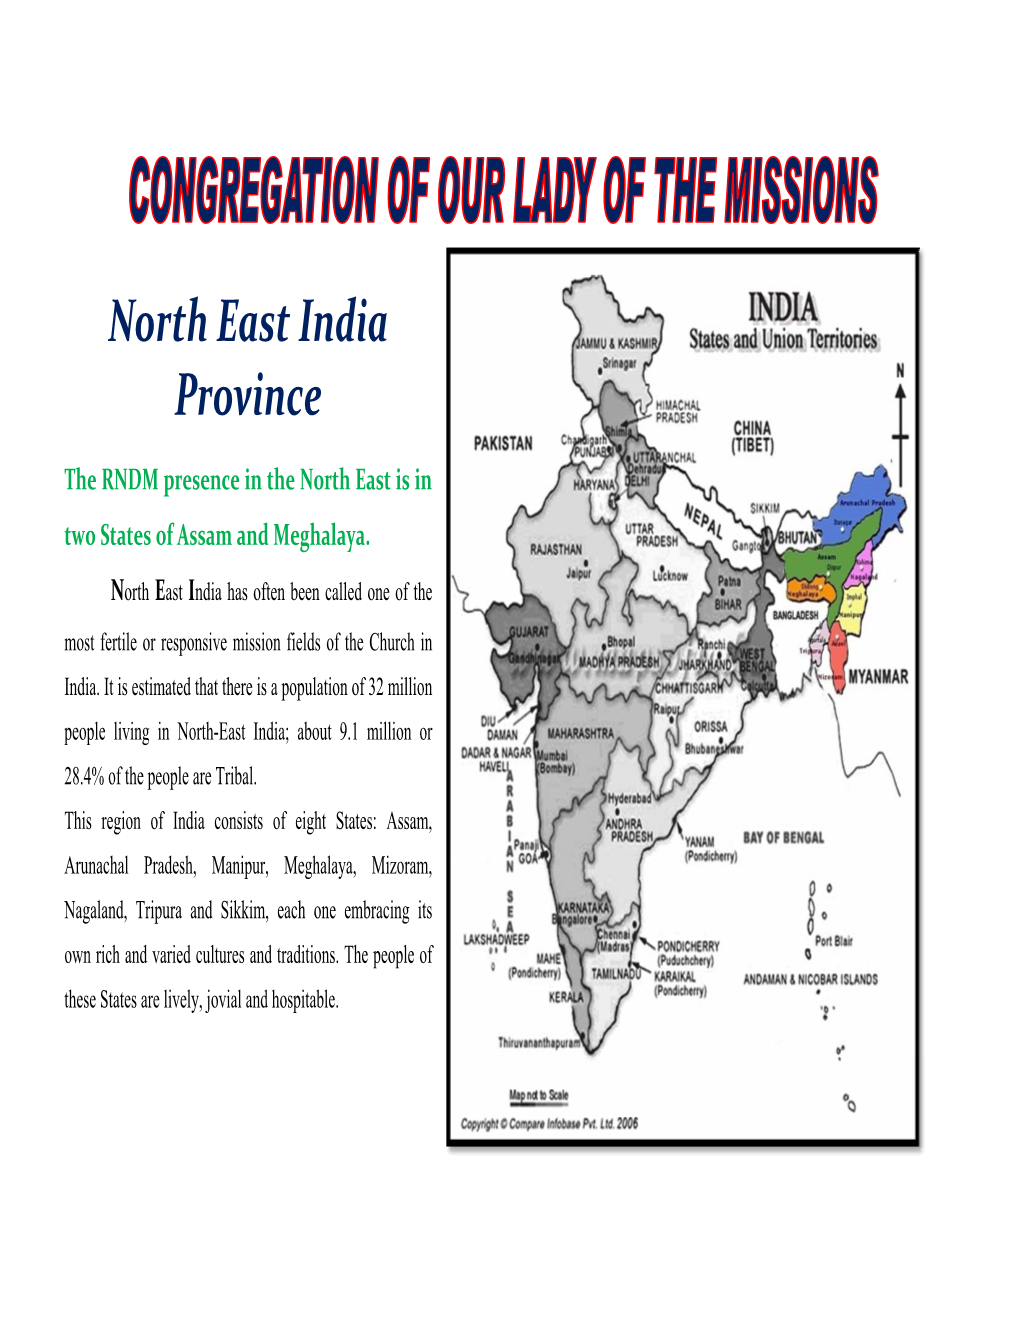 North East India Province